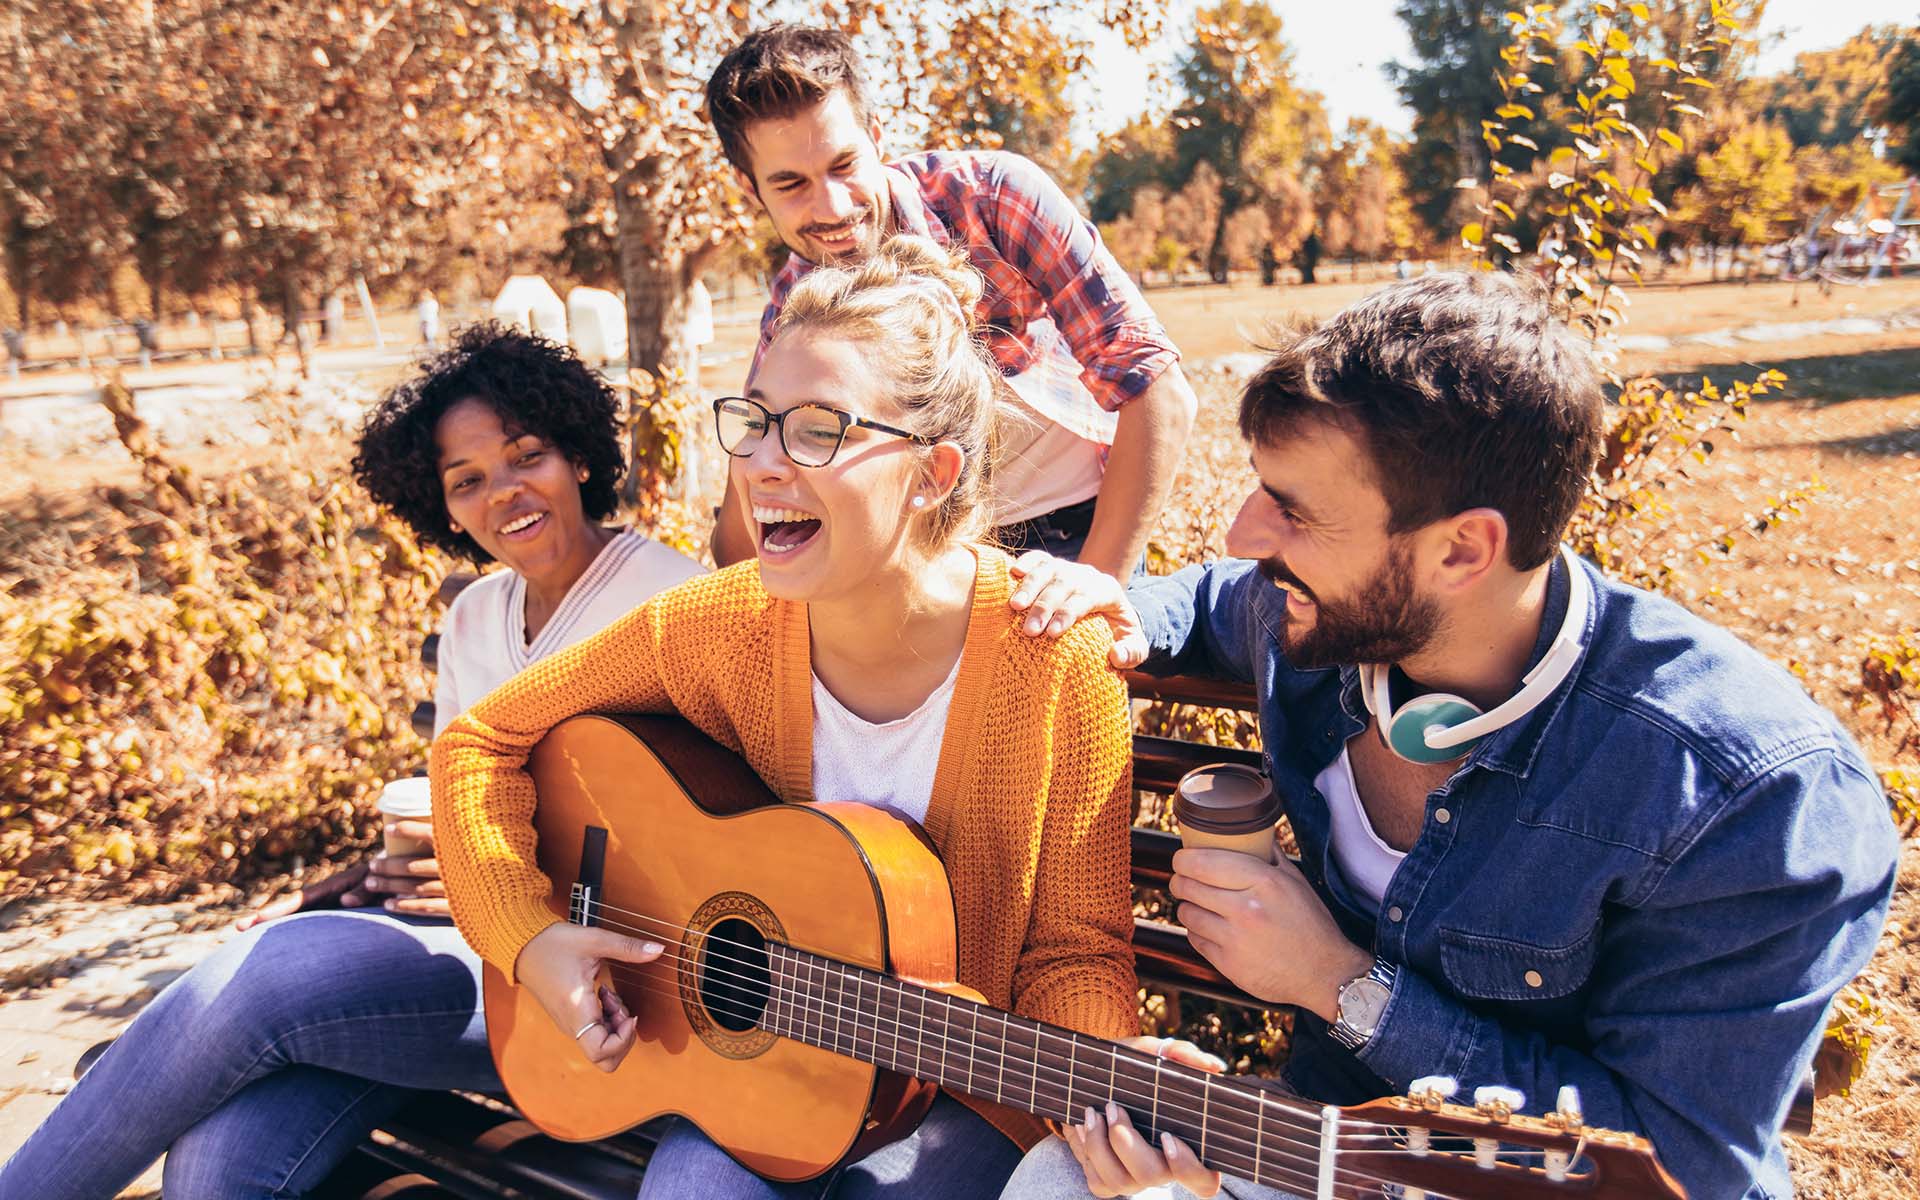 About Our Agency - Portrait of a Cheerful Group of Friends Sitting on a Bench in the Park During the Fall on a Sunny Day While One Friend Plays the Guitar